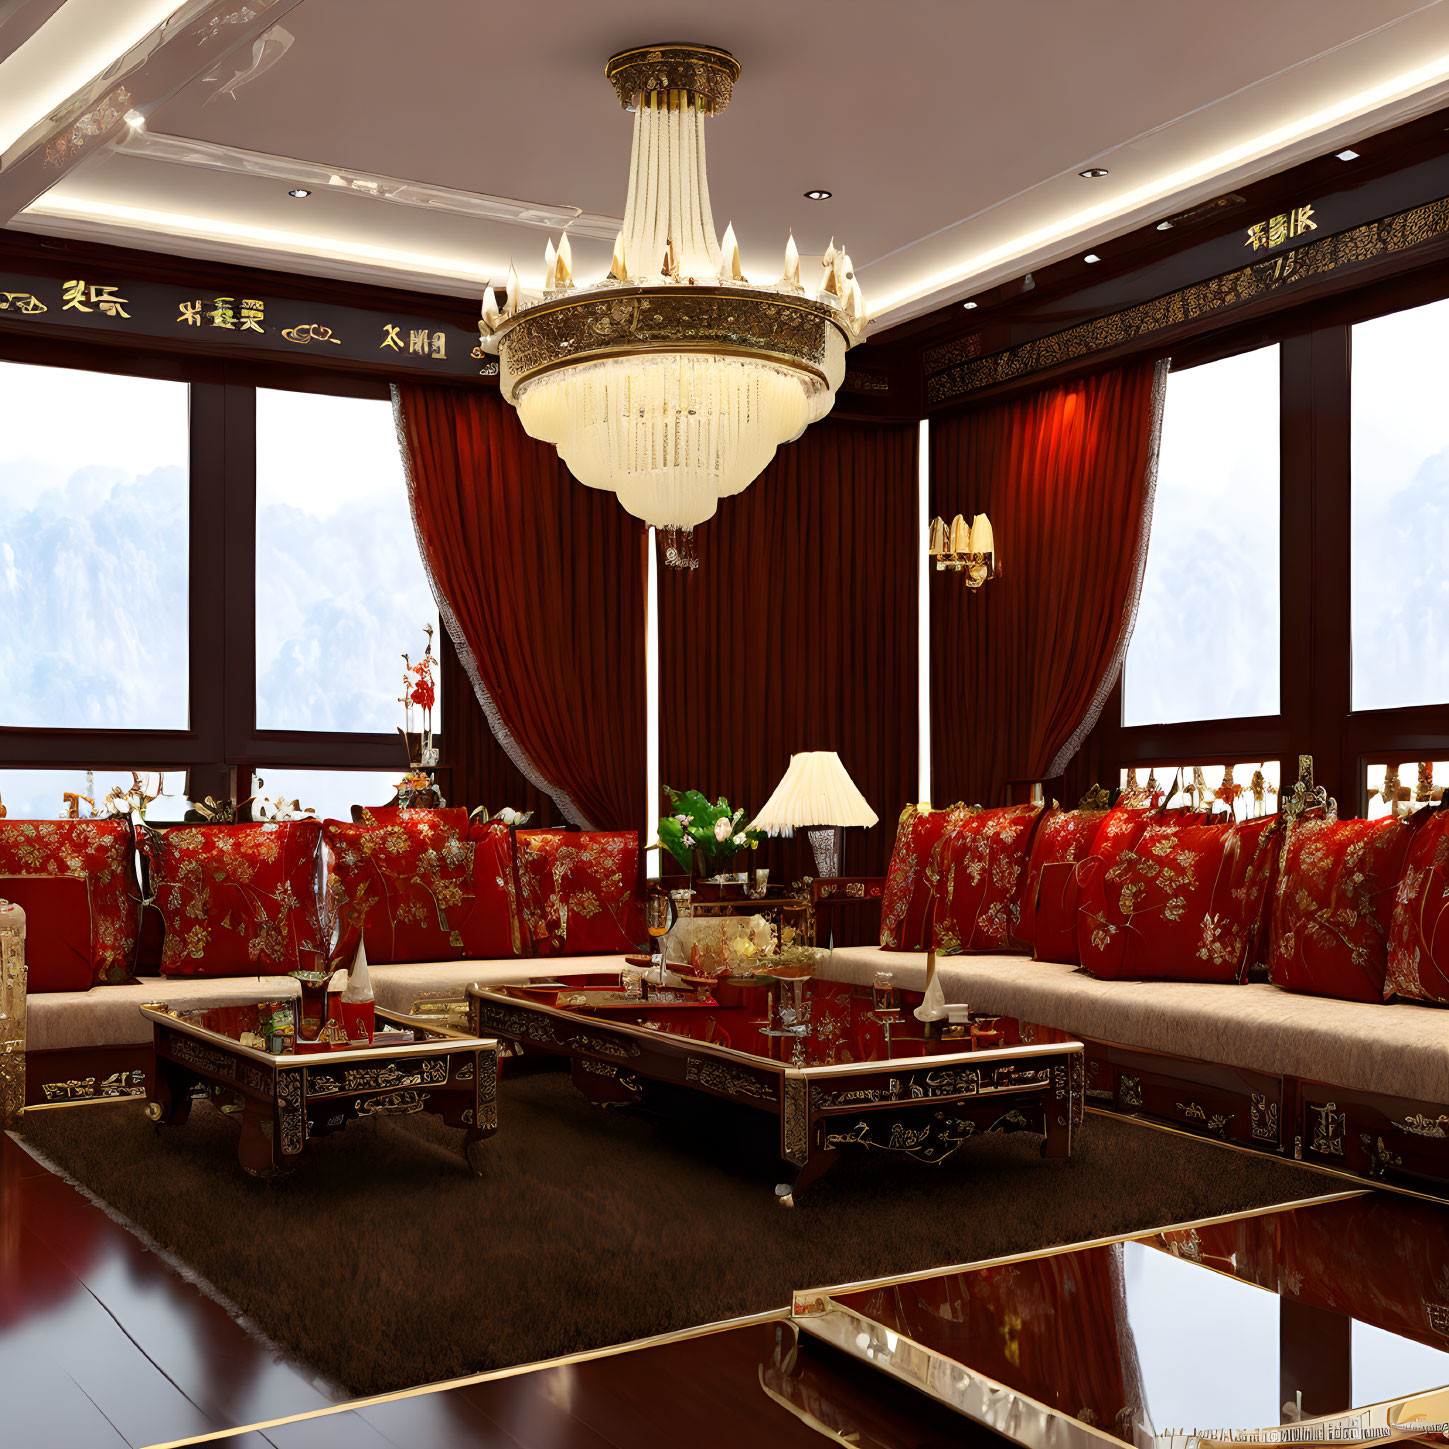 Luxurious Red-Cushioned Sofas, Wooden Tables, Chandelier, Curtains, and Asian